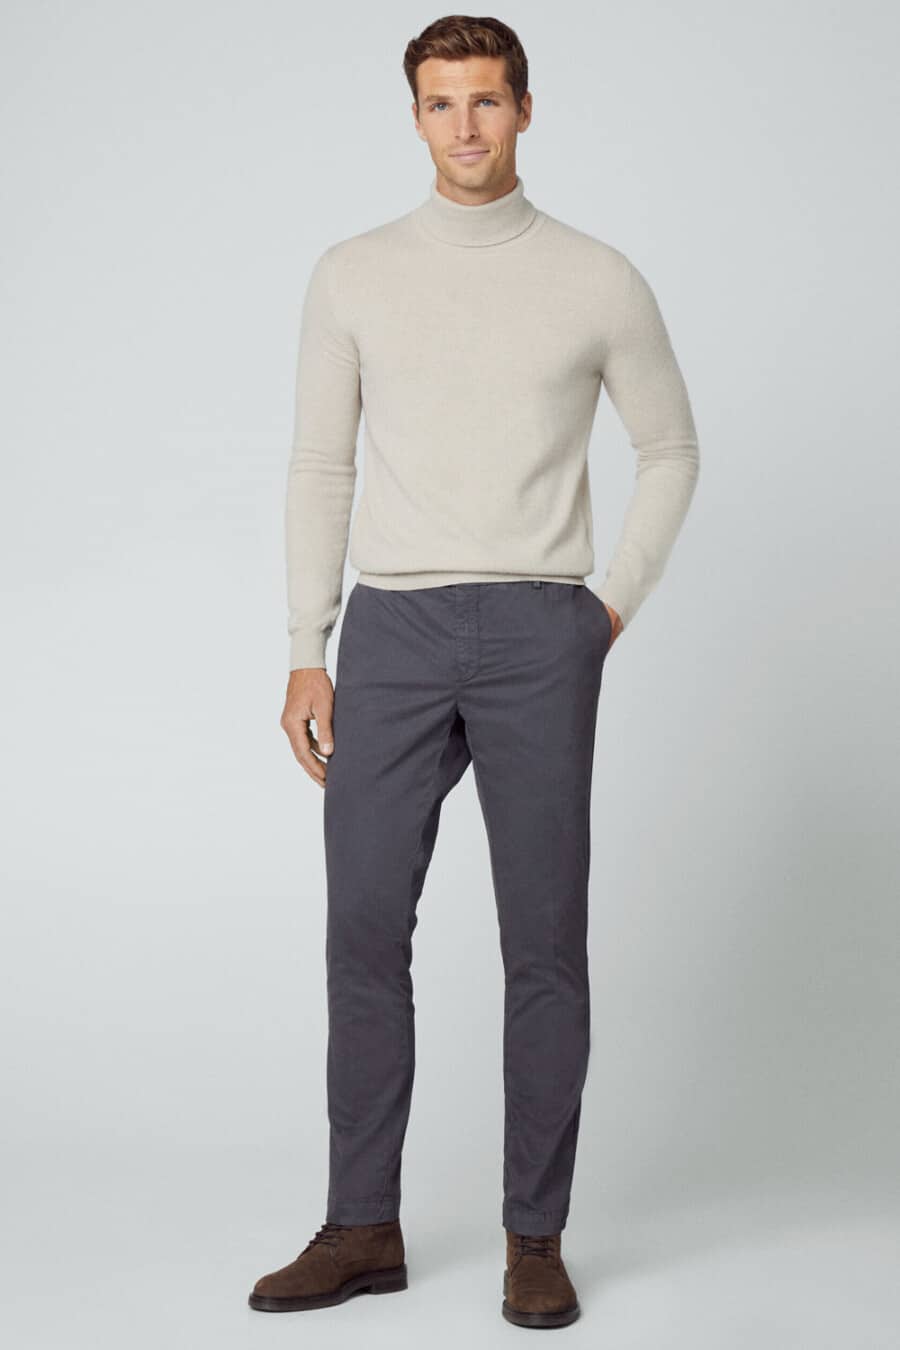 Men's dark grey chinos, off-white turtleneck and brown suede boots outfit